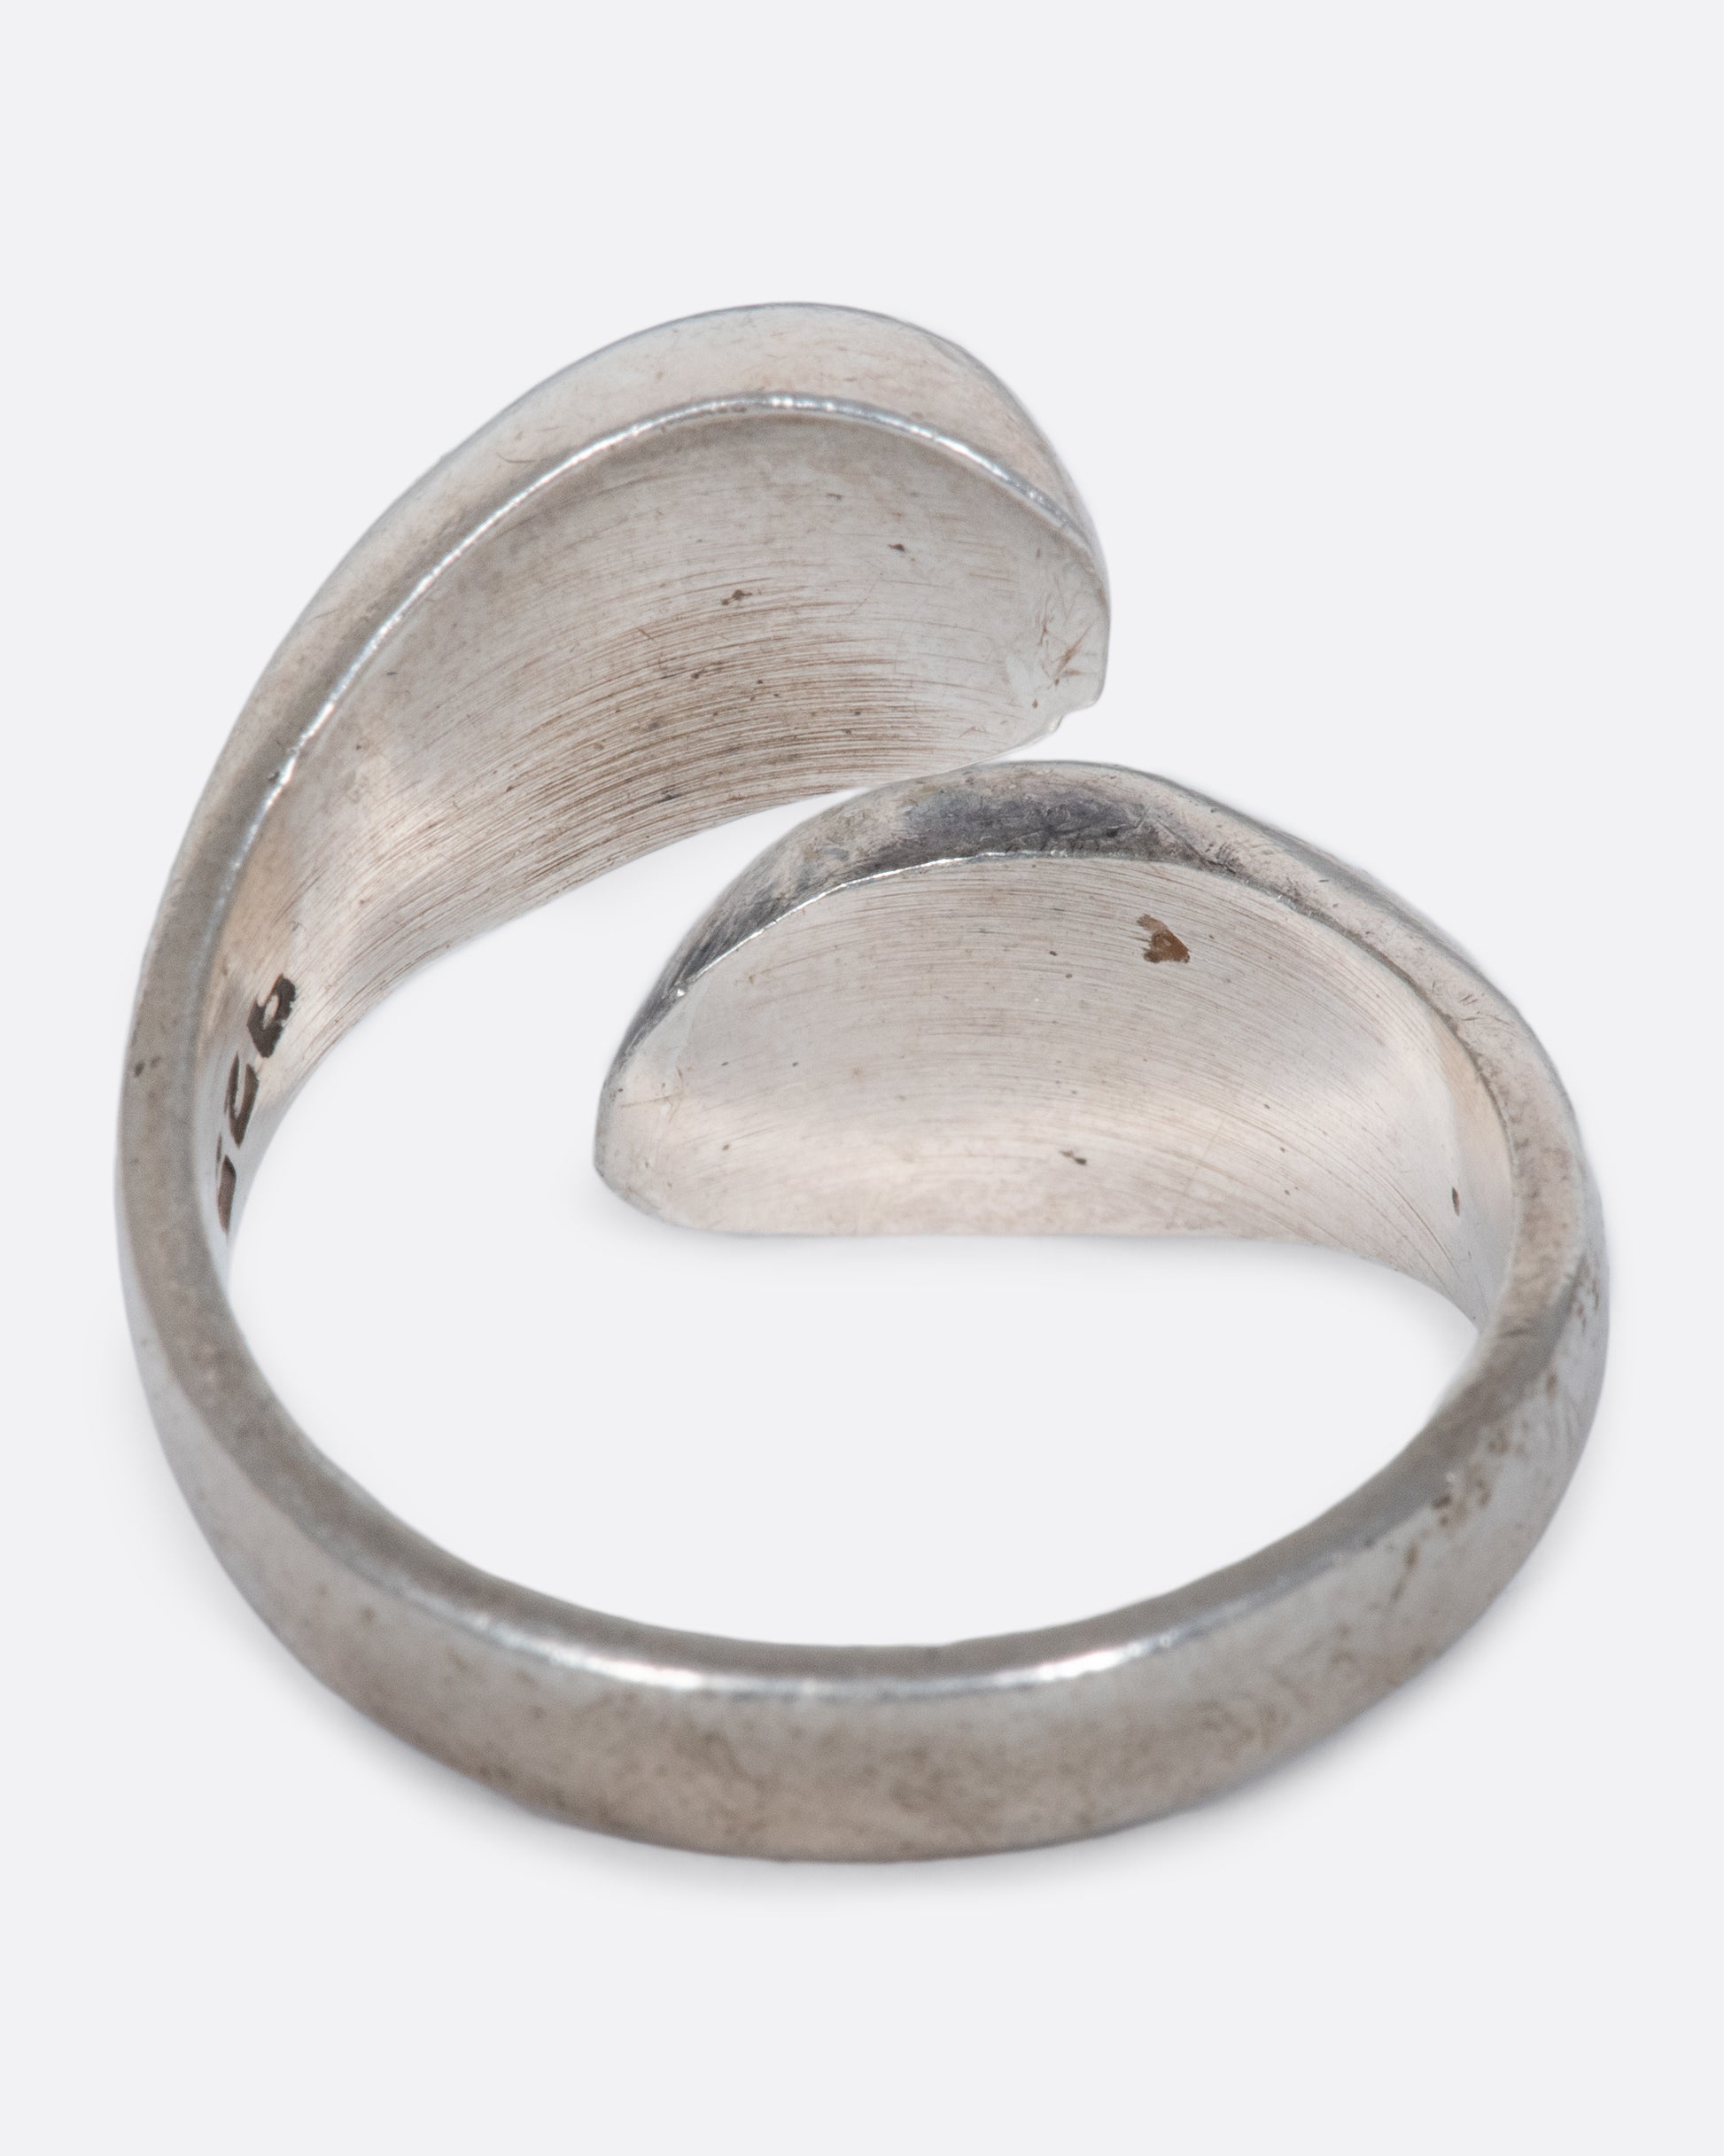 A vintage sterling silver wrap ring with rounded ends.